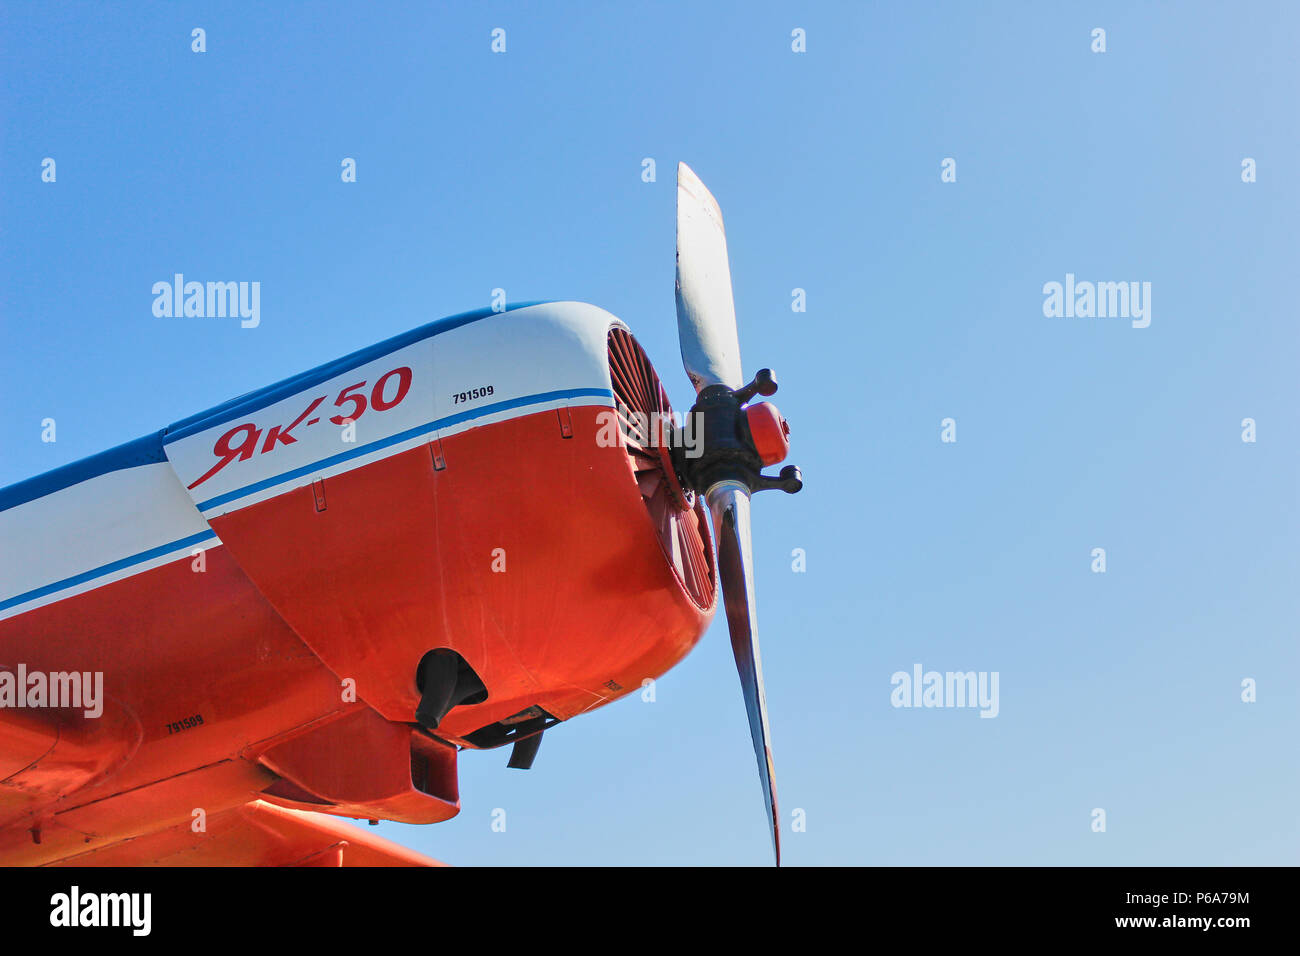 Angle view from below of a old propeller powered soviet plane Yak-50 Stock Photo